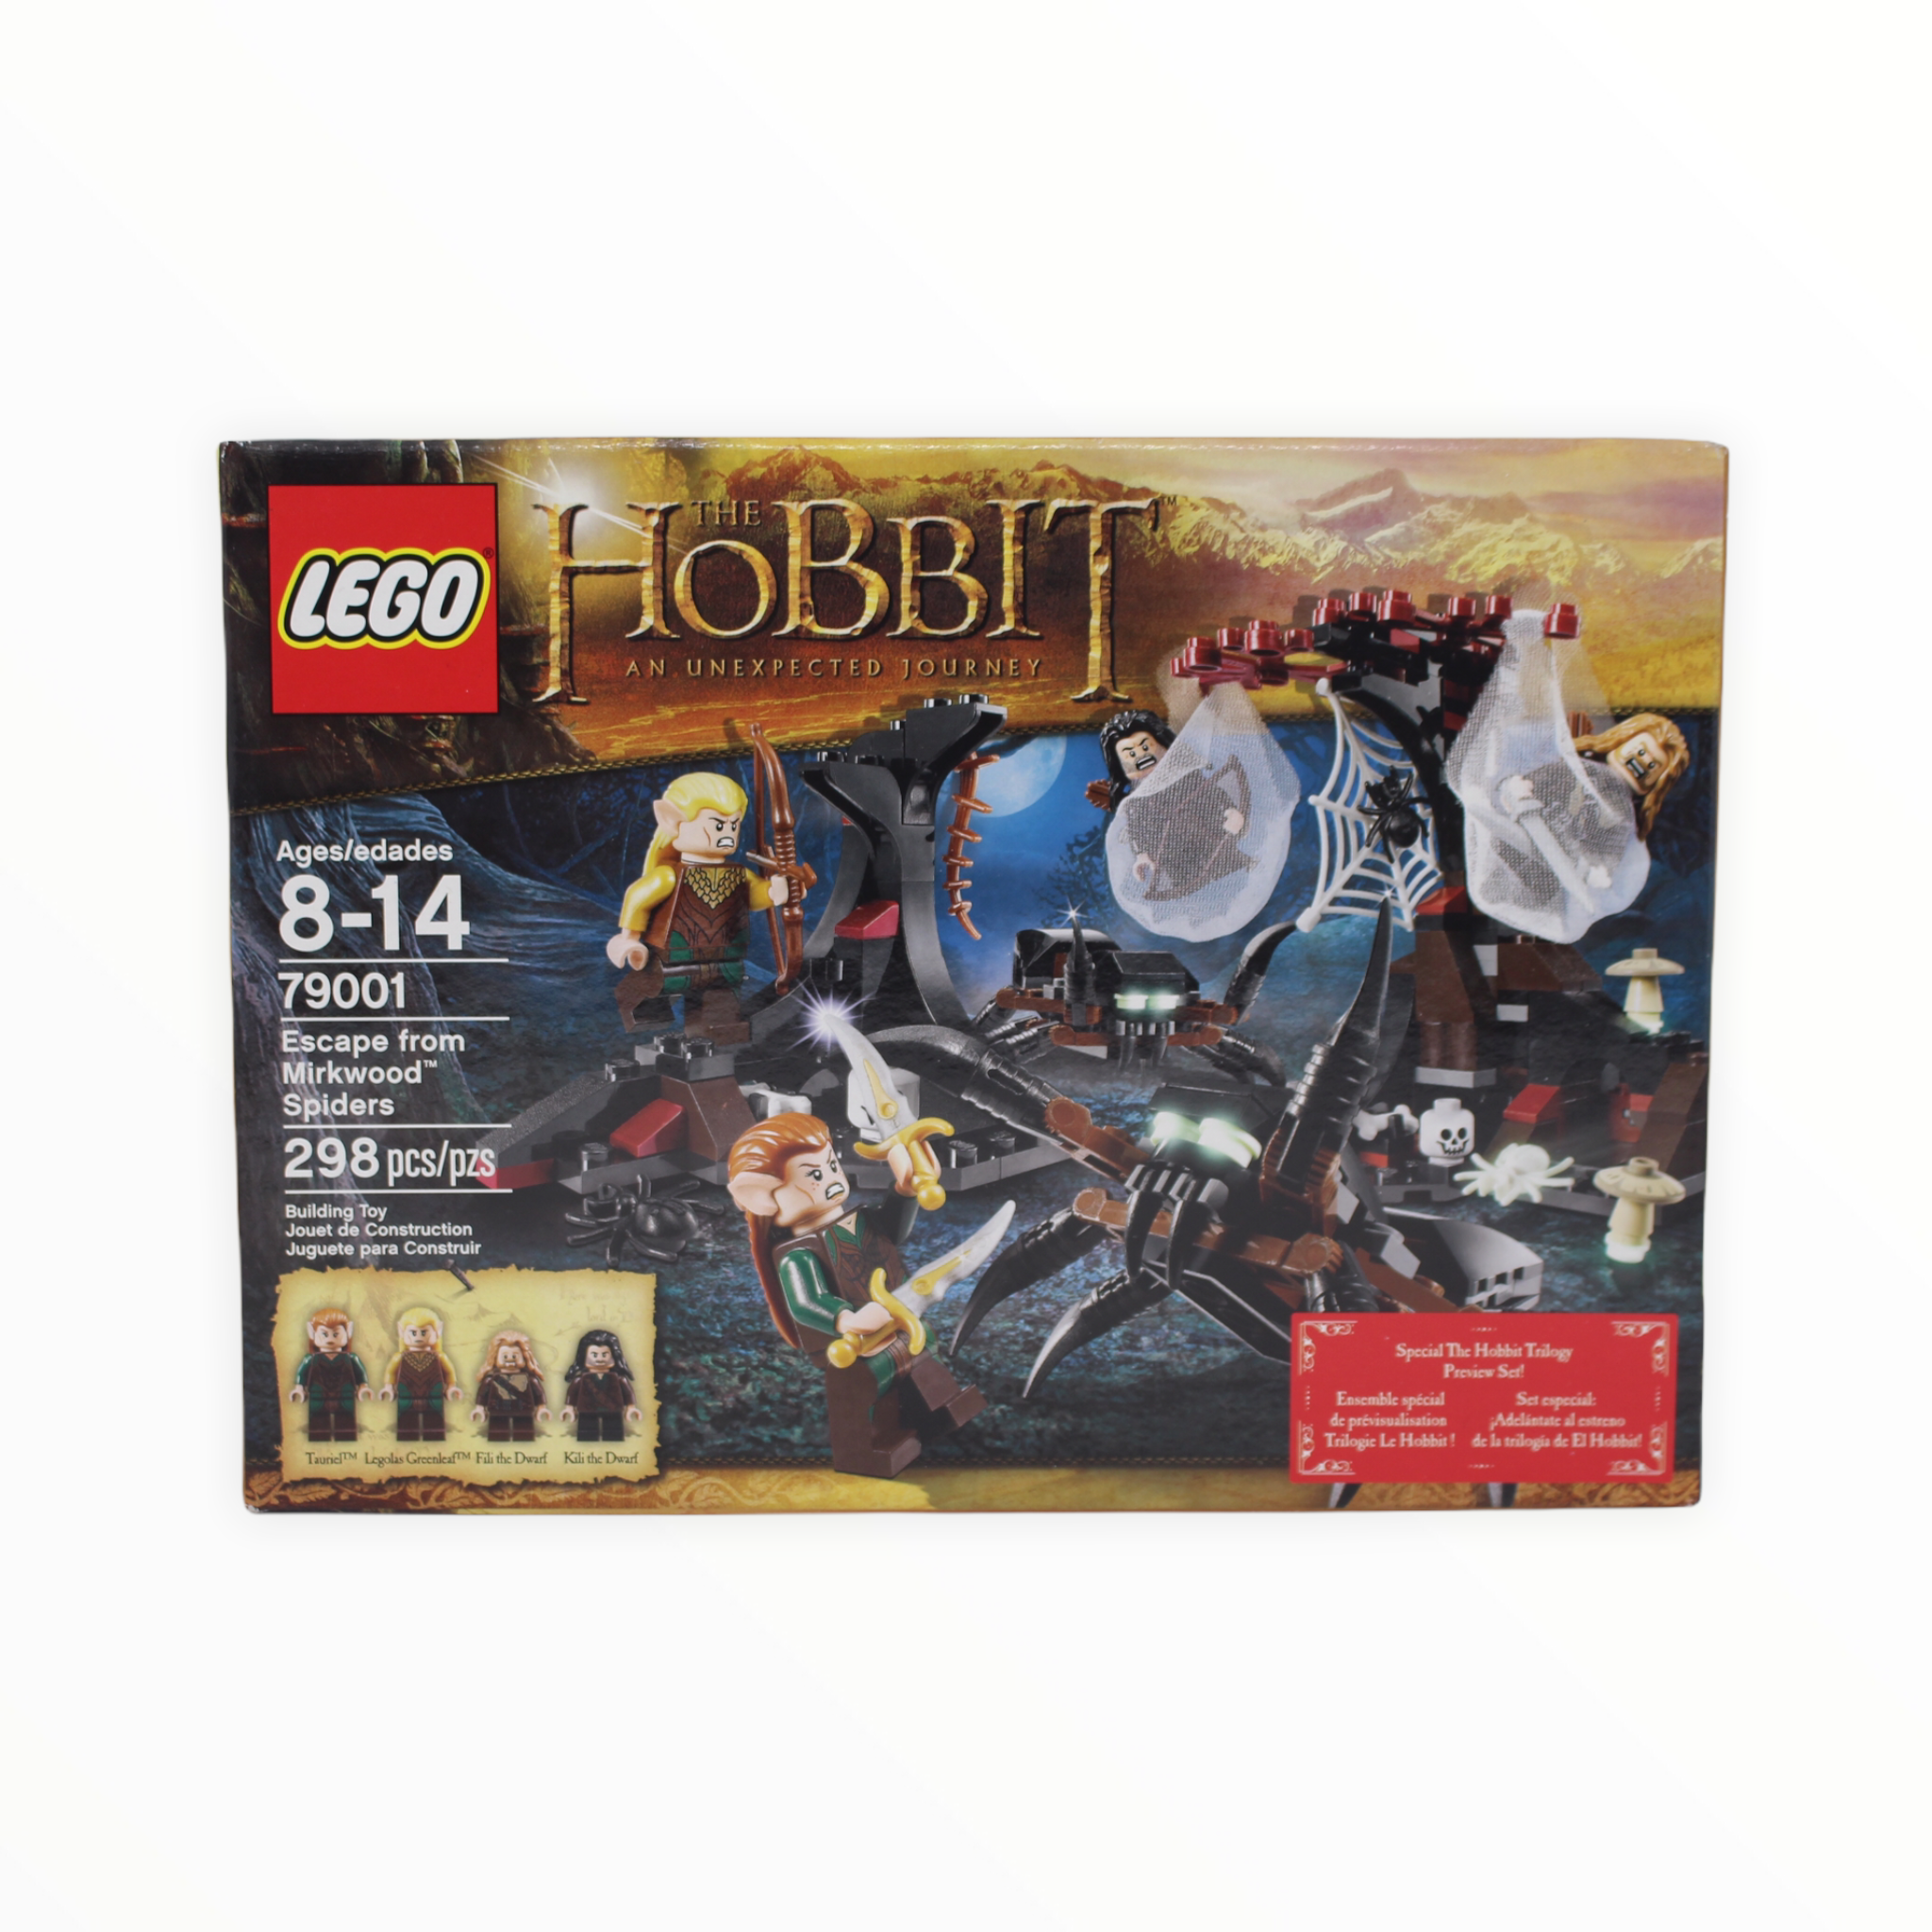 Retired Set 79001 The Hobbit Escape from Mirkwood Spiders